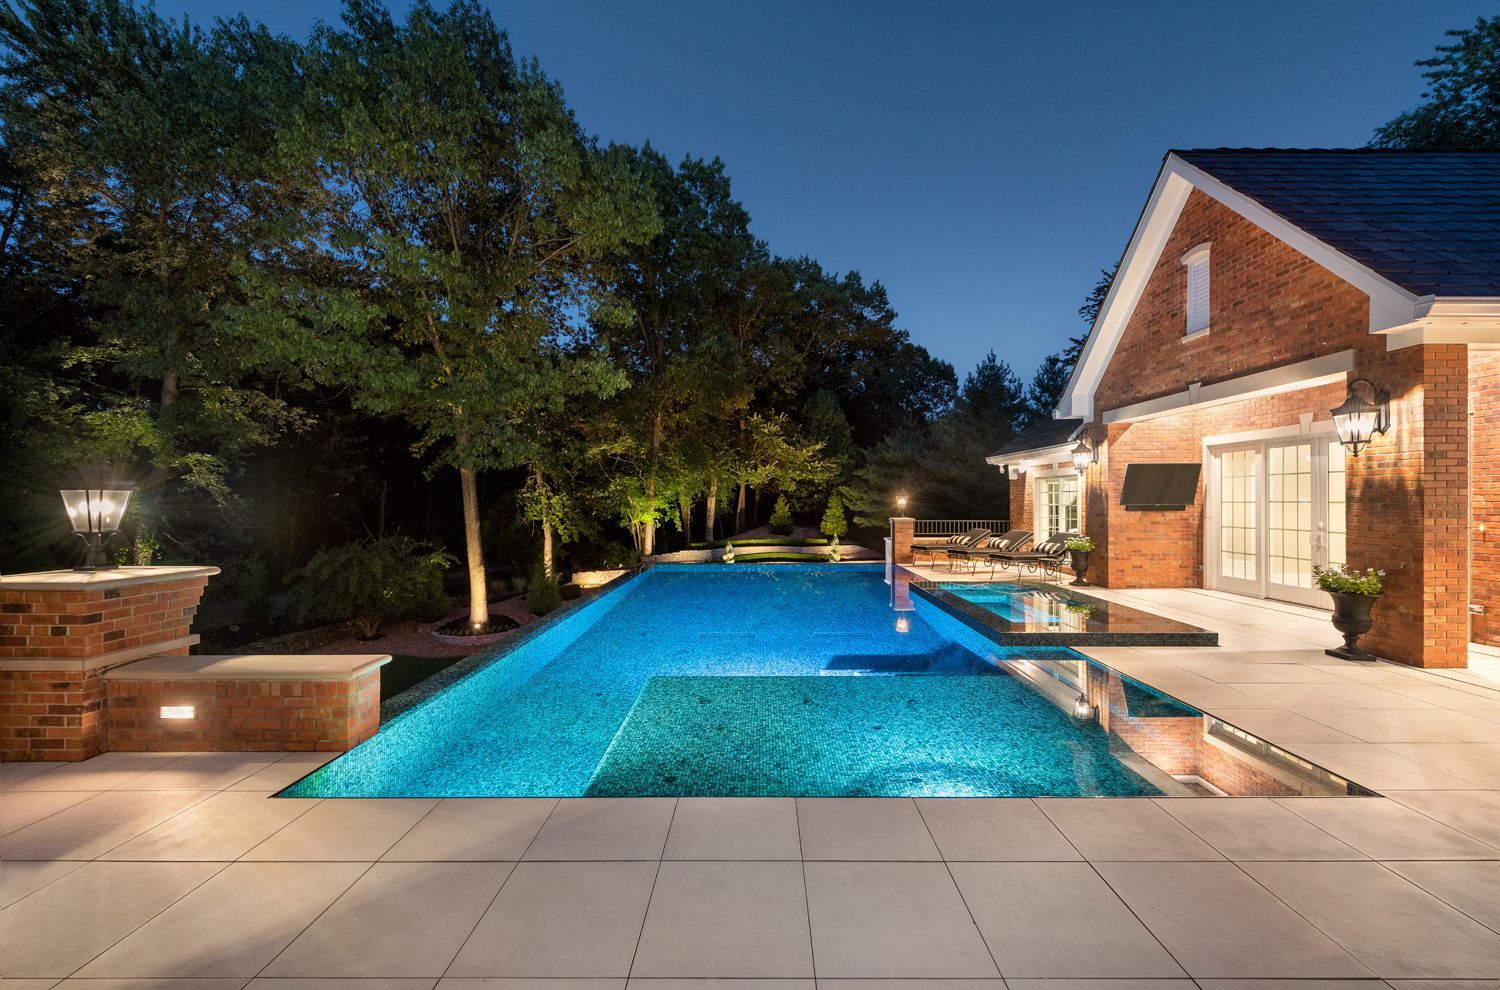 there is a large swimming pool in the backyard of a house .